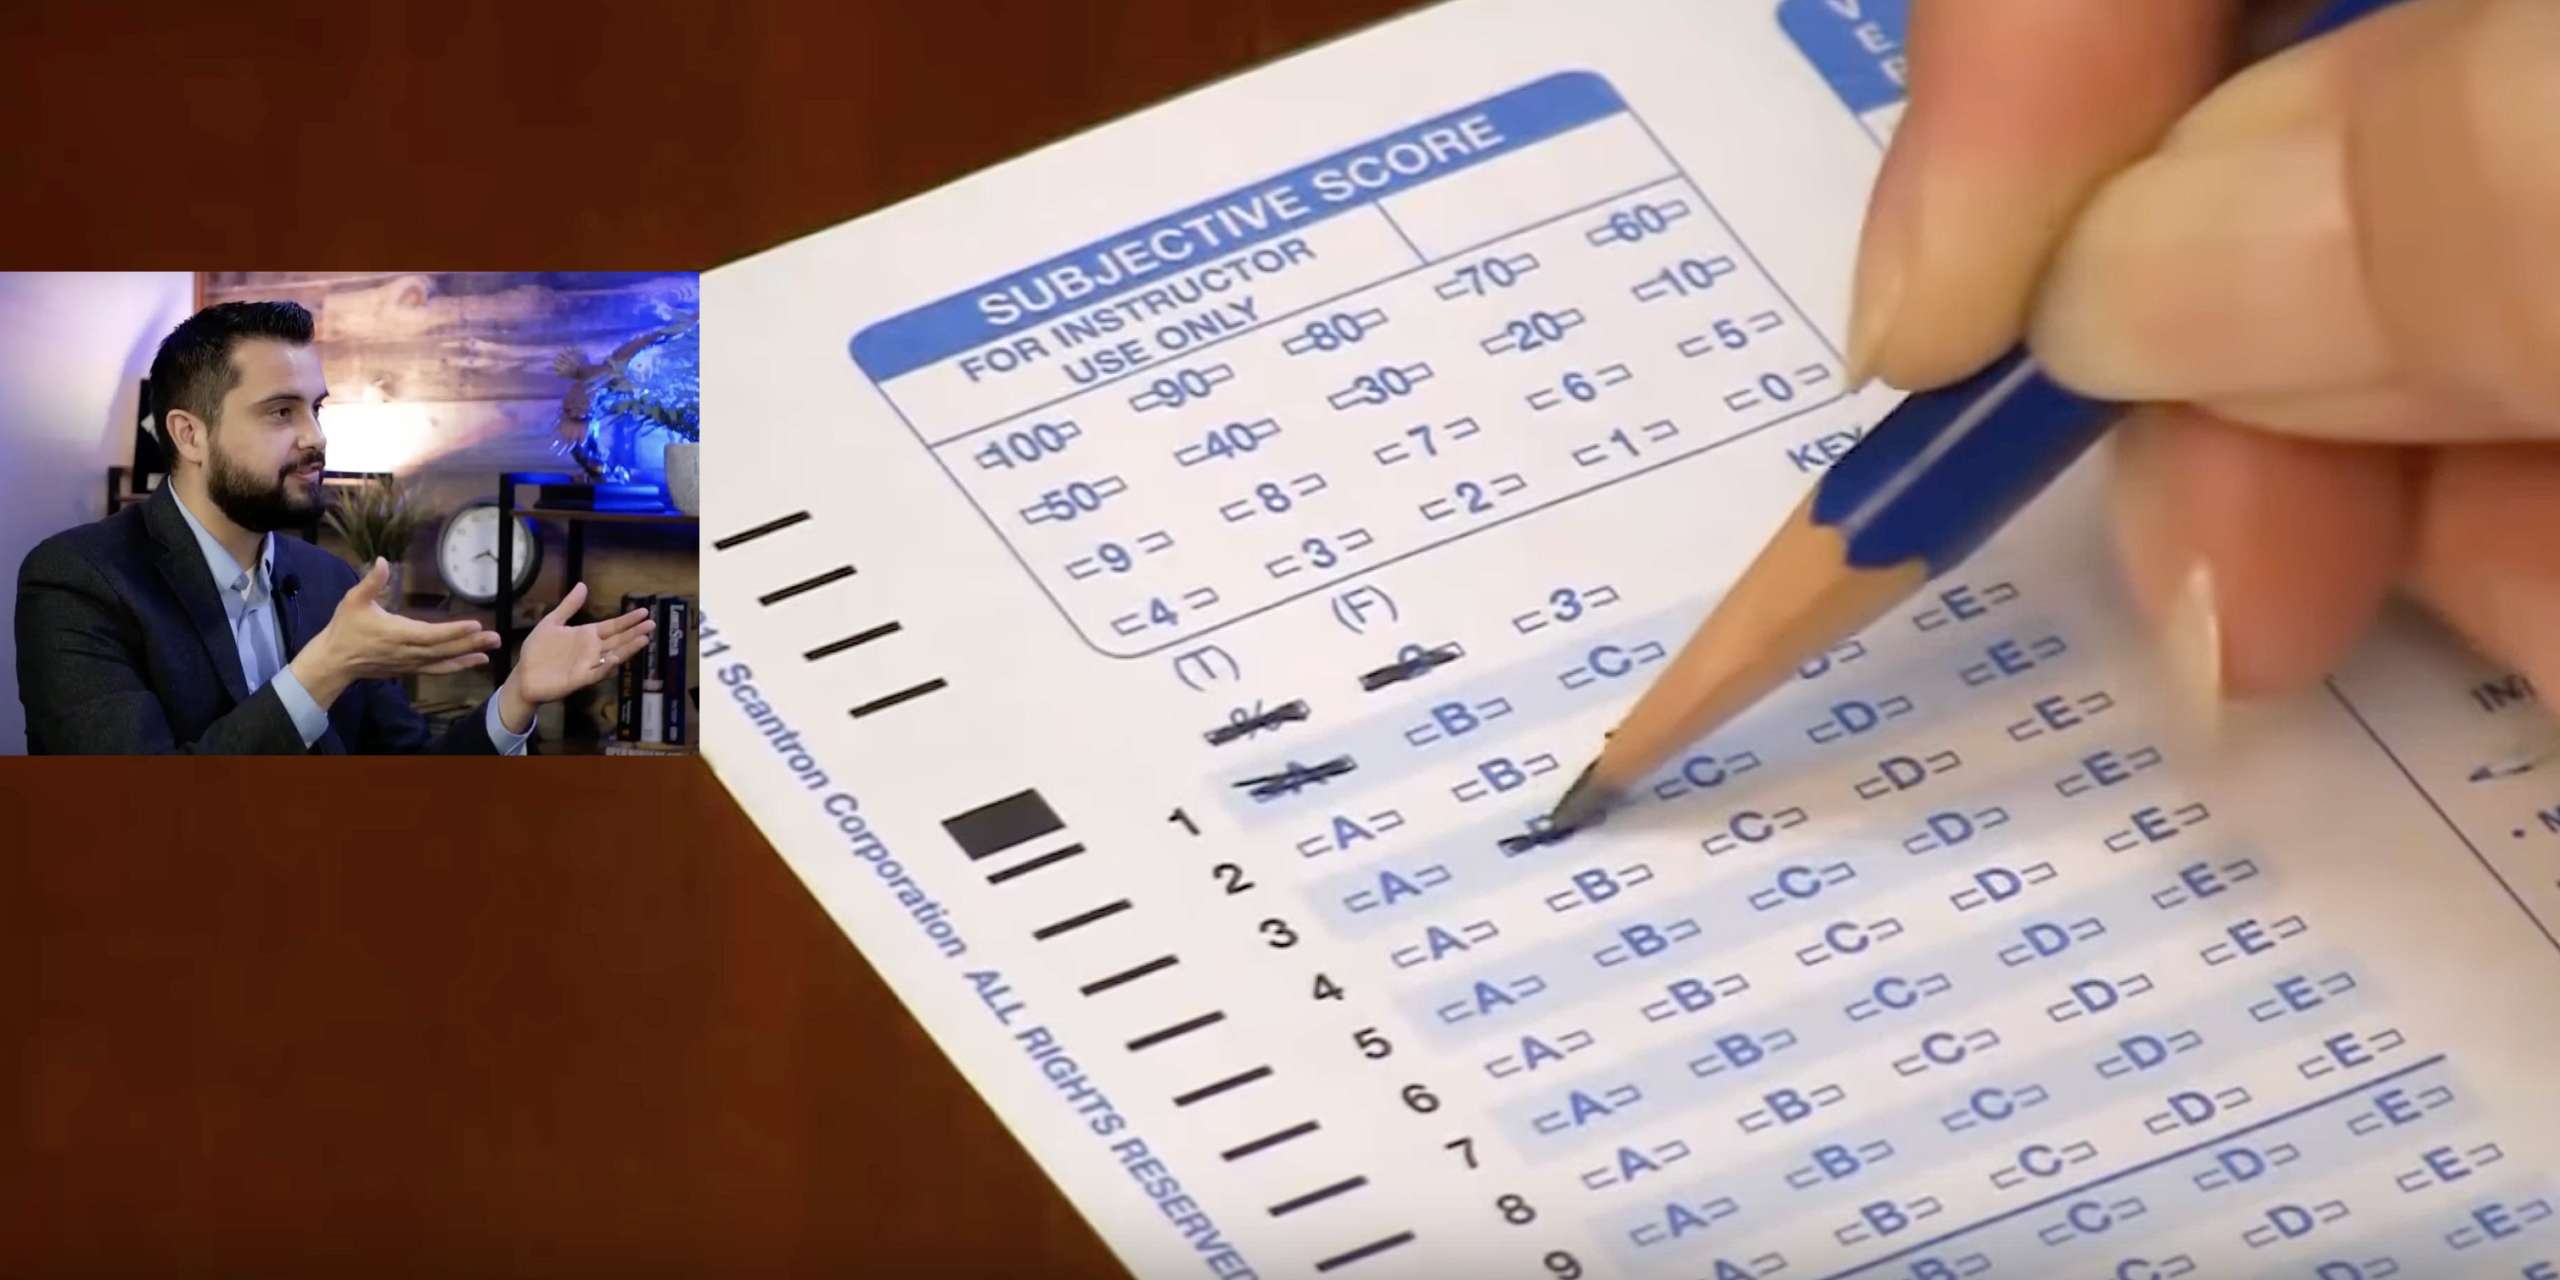 ‘A Massive & Horrible Conundrum:’ GOP Election Expert Skeptical of His Party’s Plan for Scantron Voting at Assembly